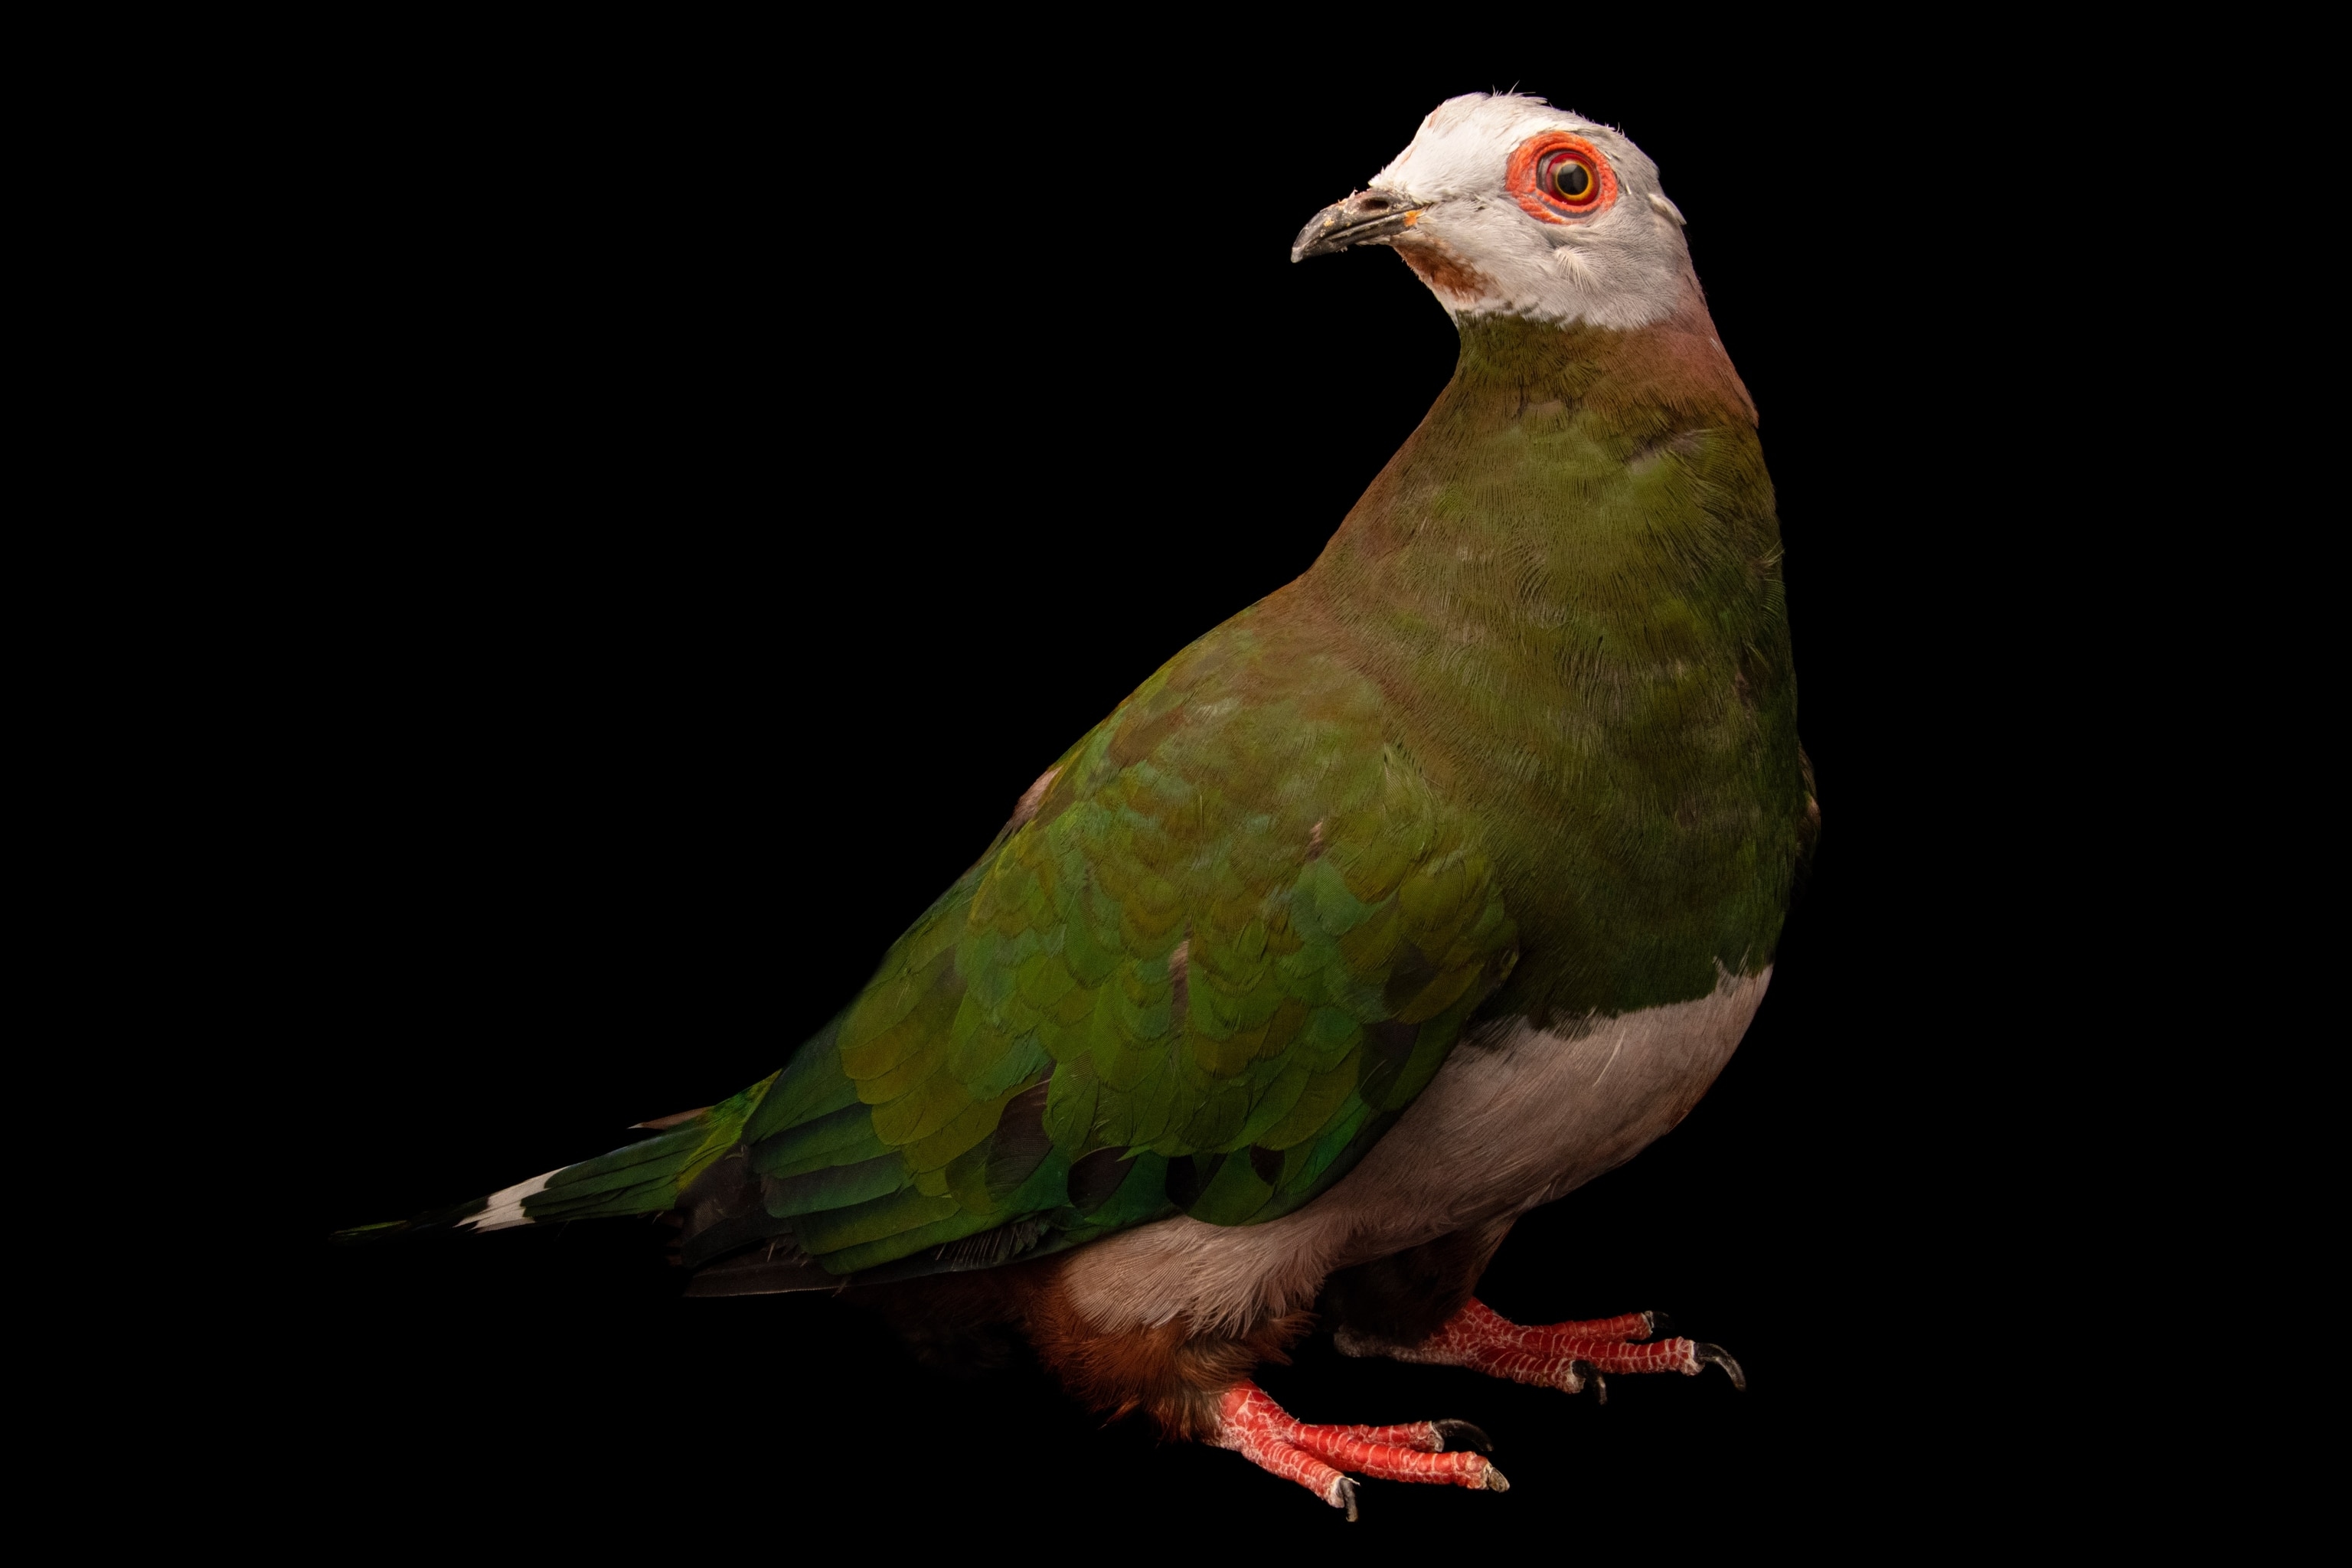 Studio photograph of a pink-bellied imperial pigeon